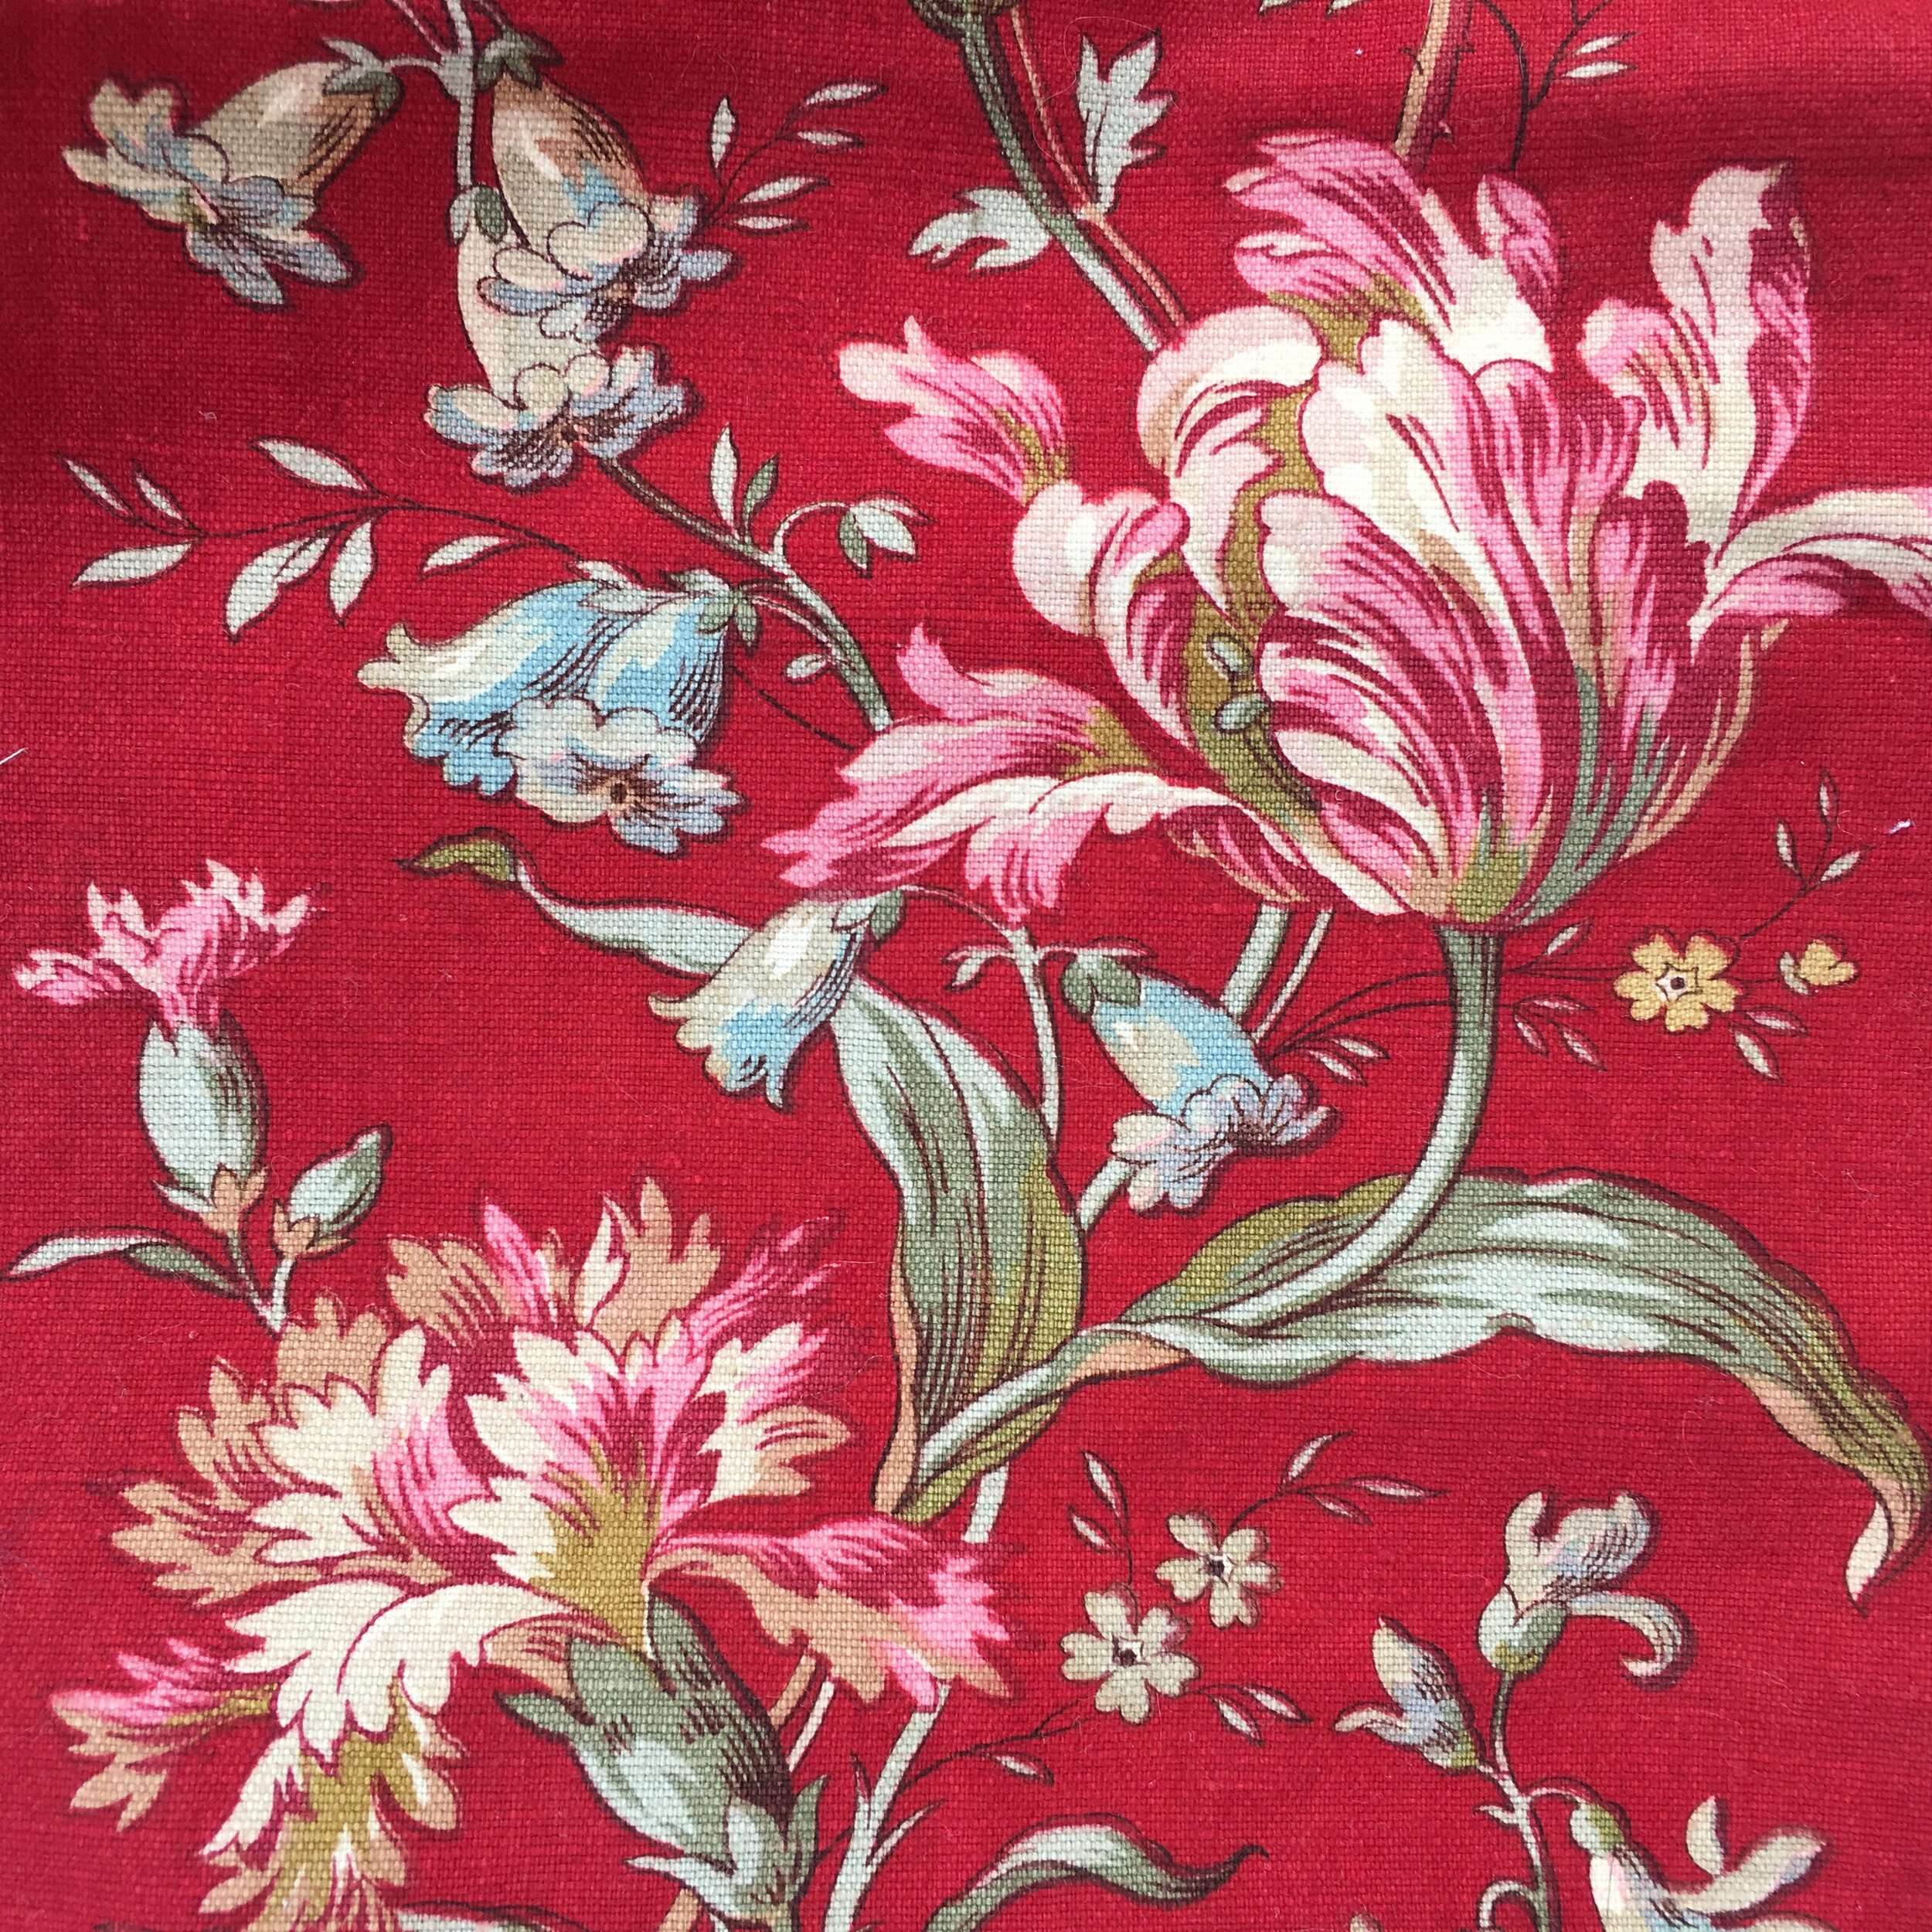 Antique French Red Fabric.jpg